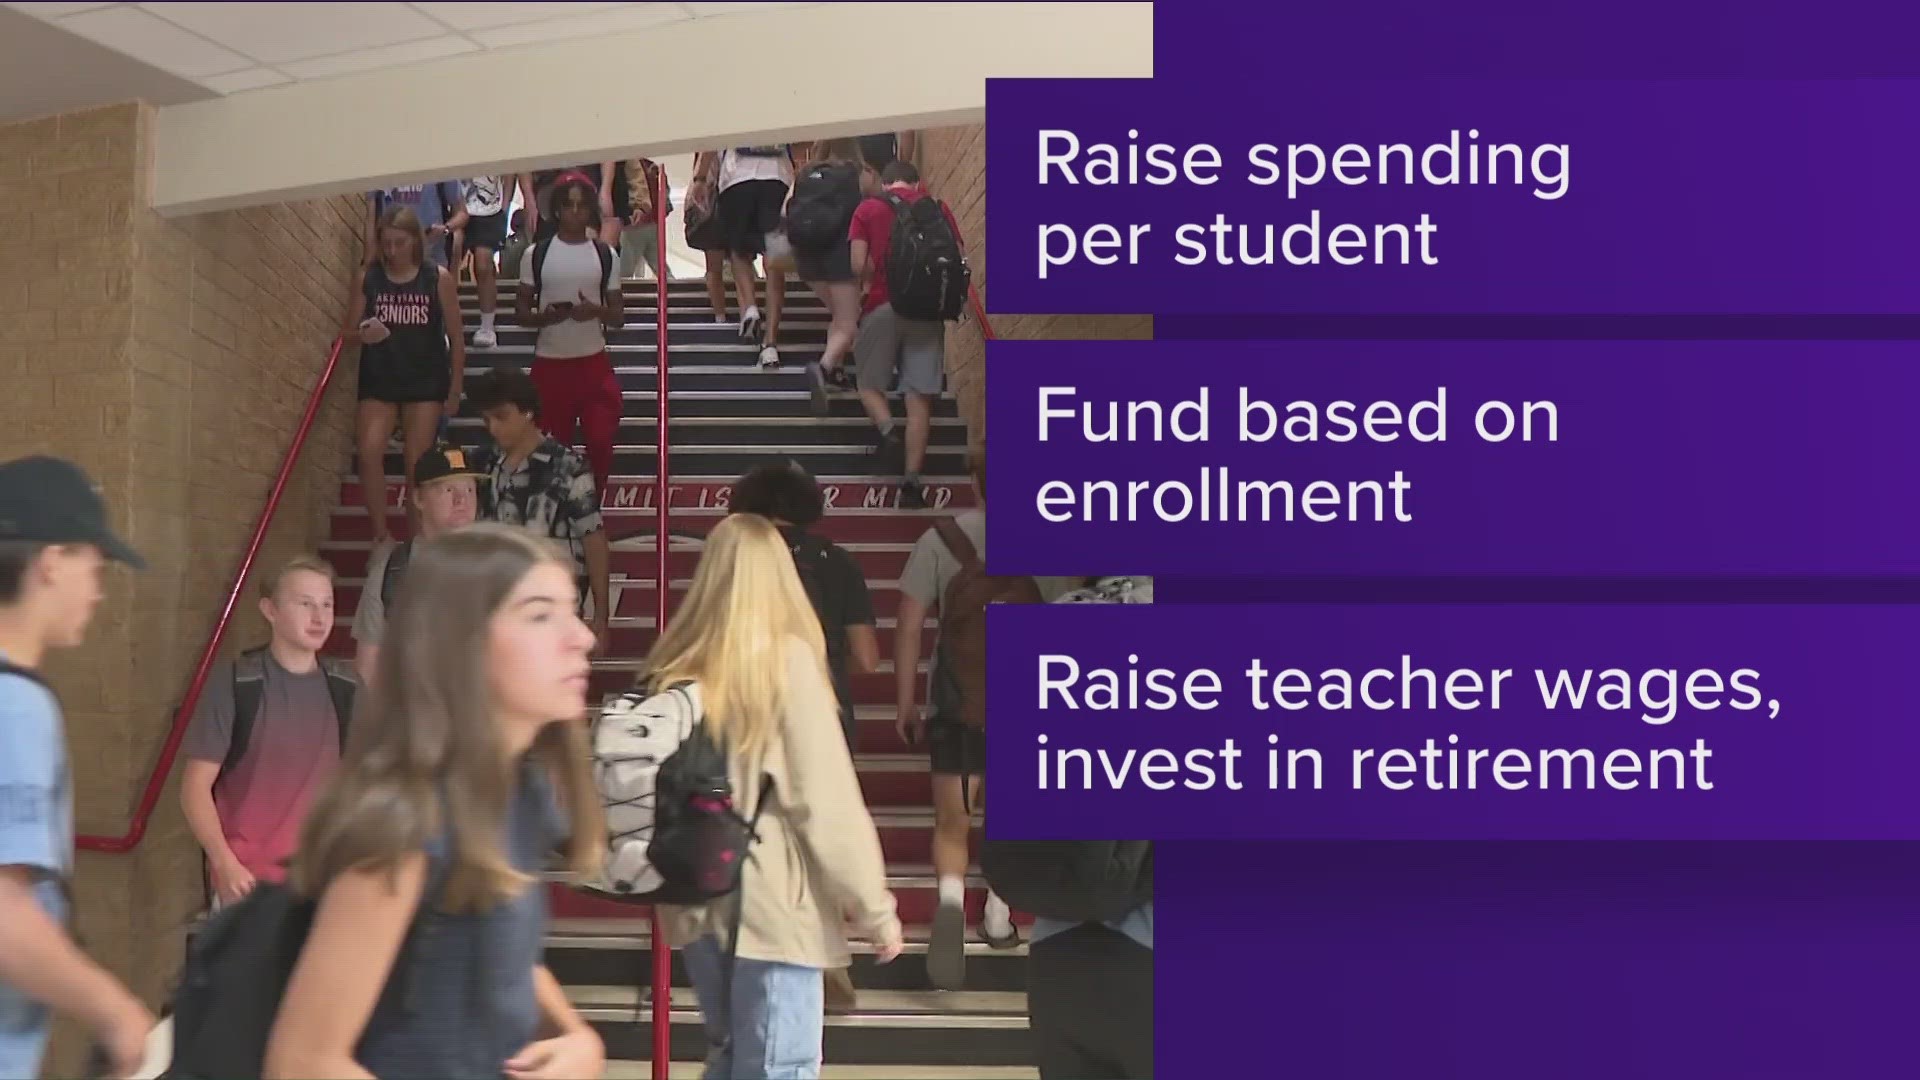 Texas Democrats laid out a proposal to raise the amount of money the State spends per student to $7,500 by the year 2025.